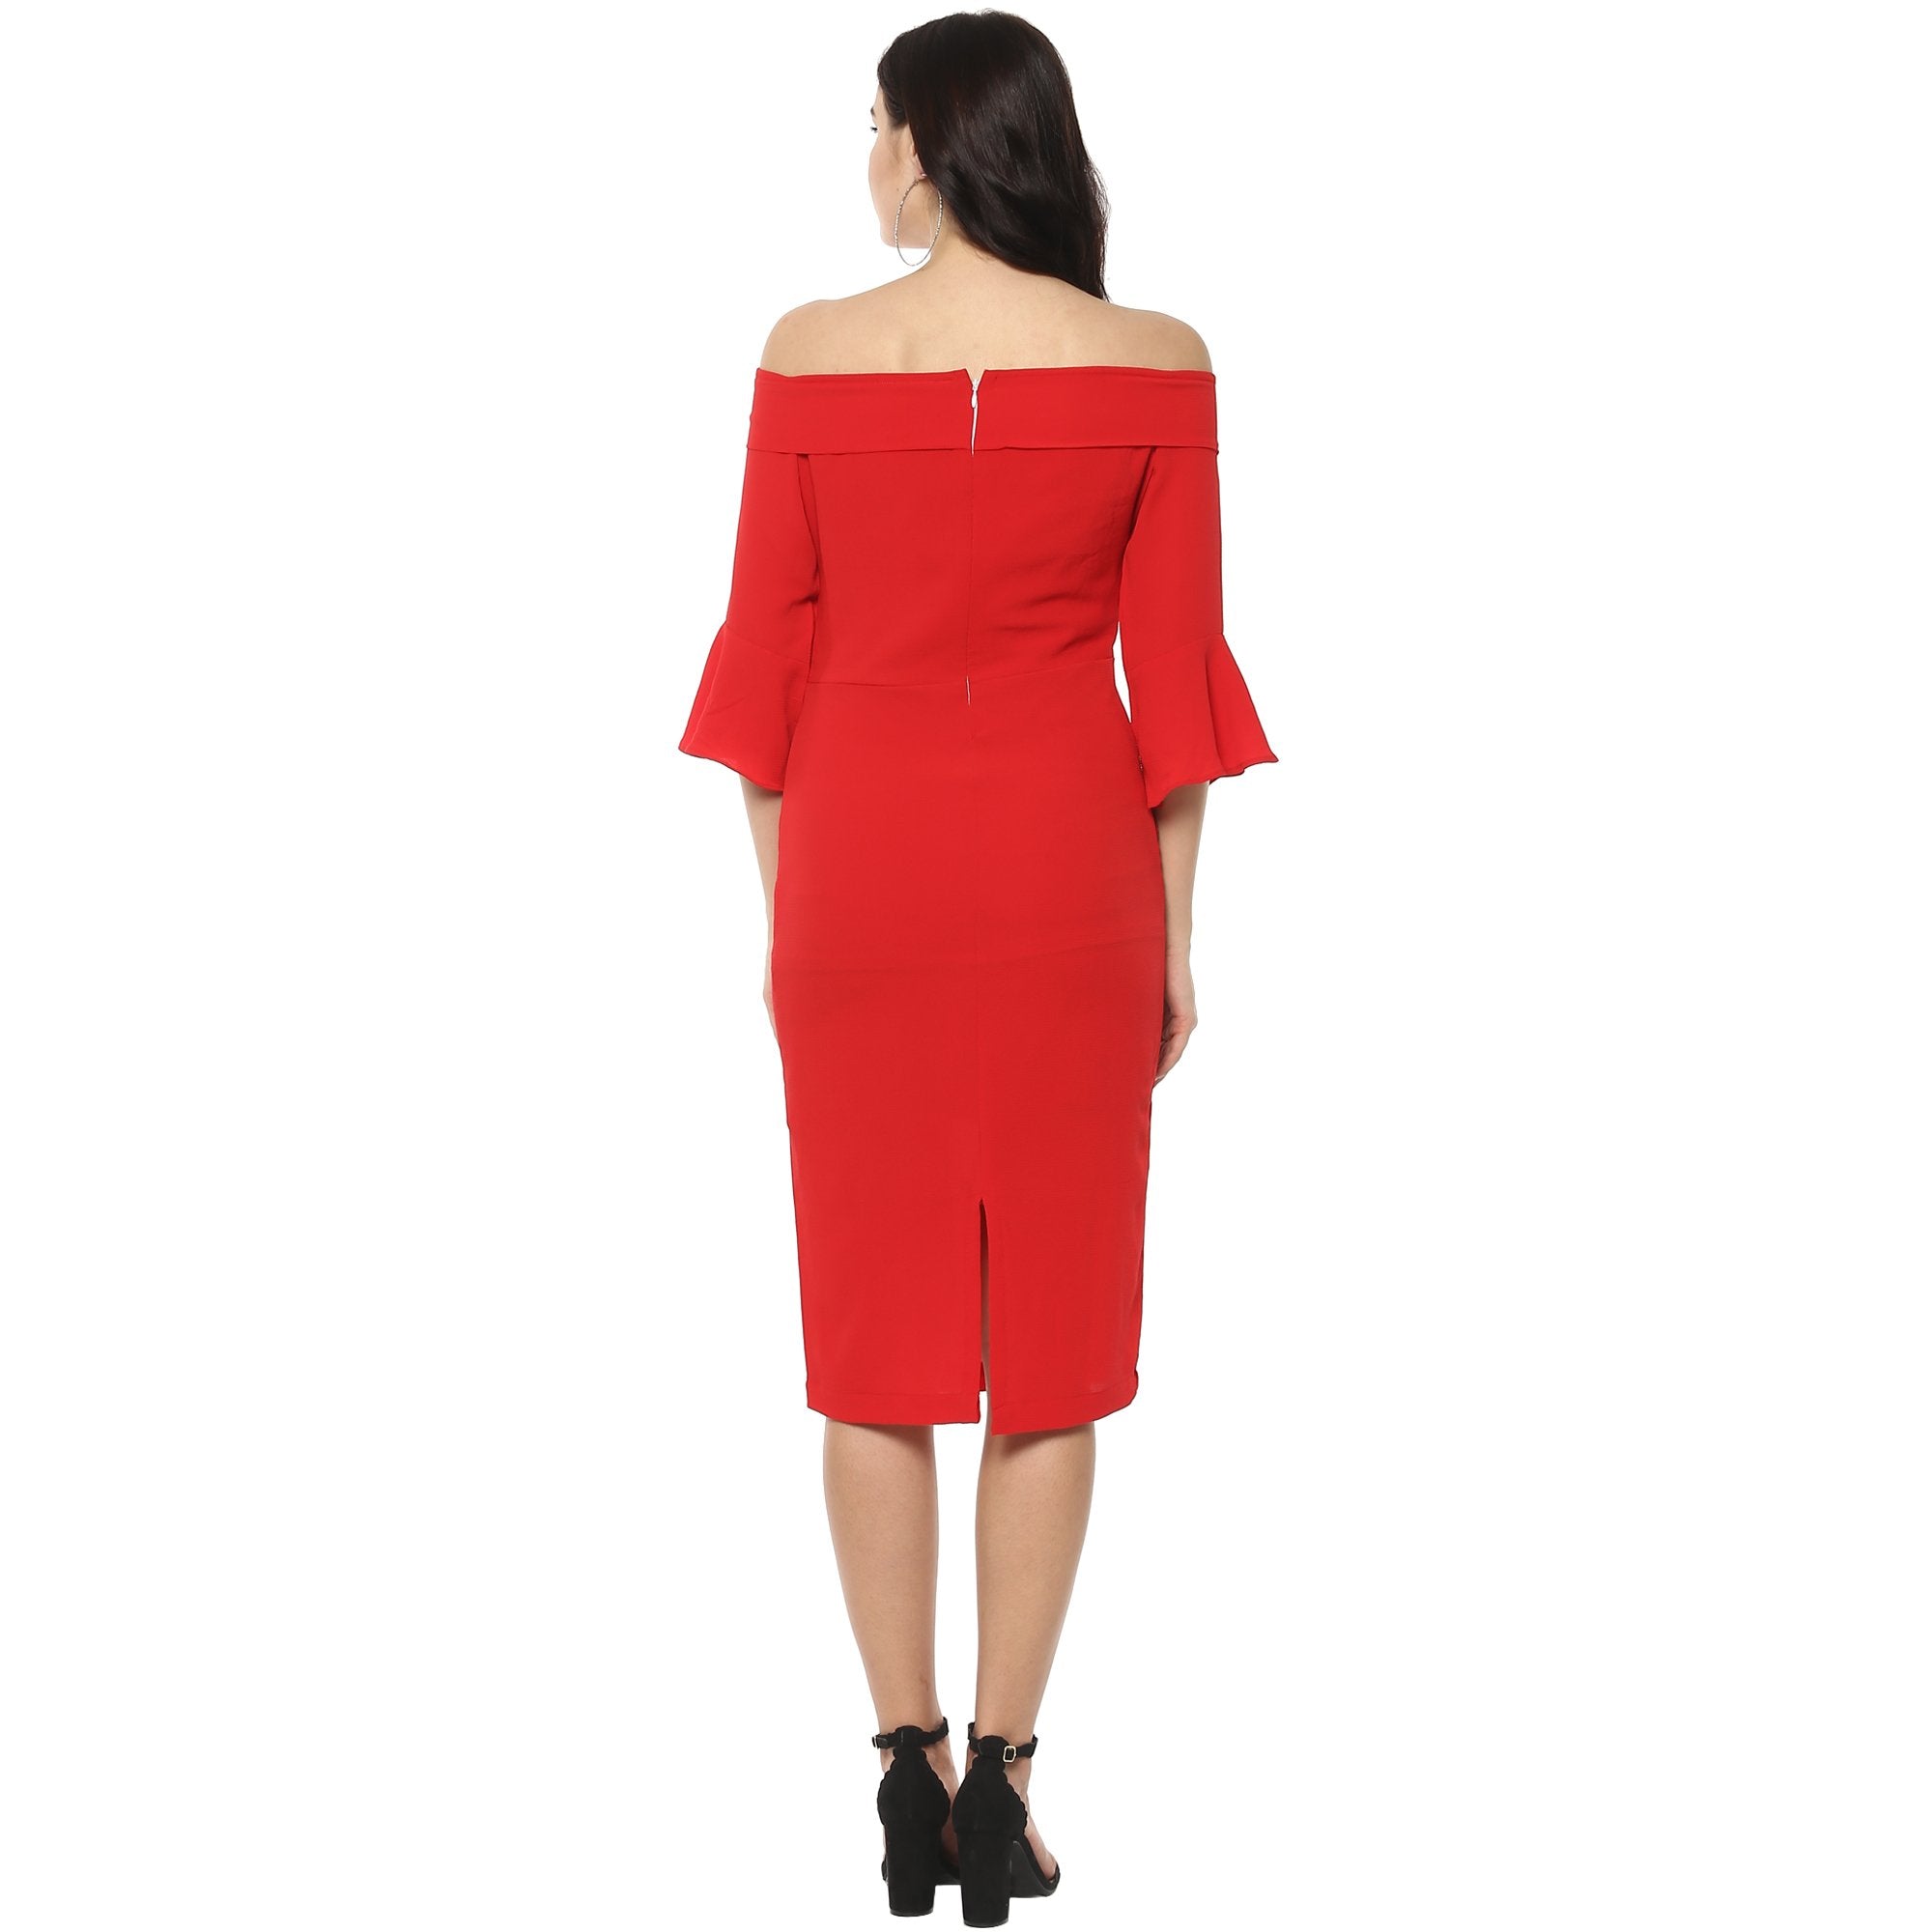 Women's Off-Shoulder Midi Fitted Dress - Pannkh